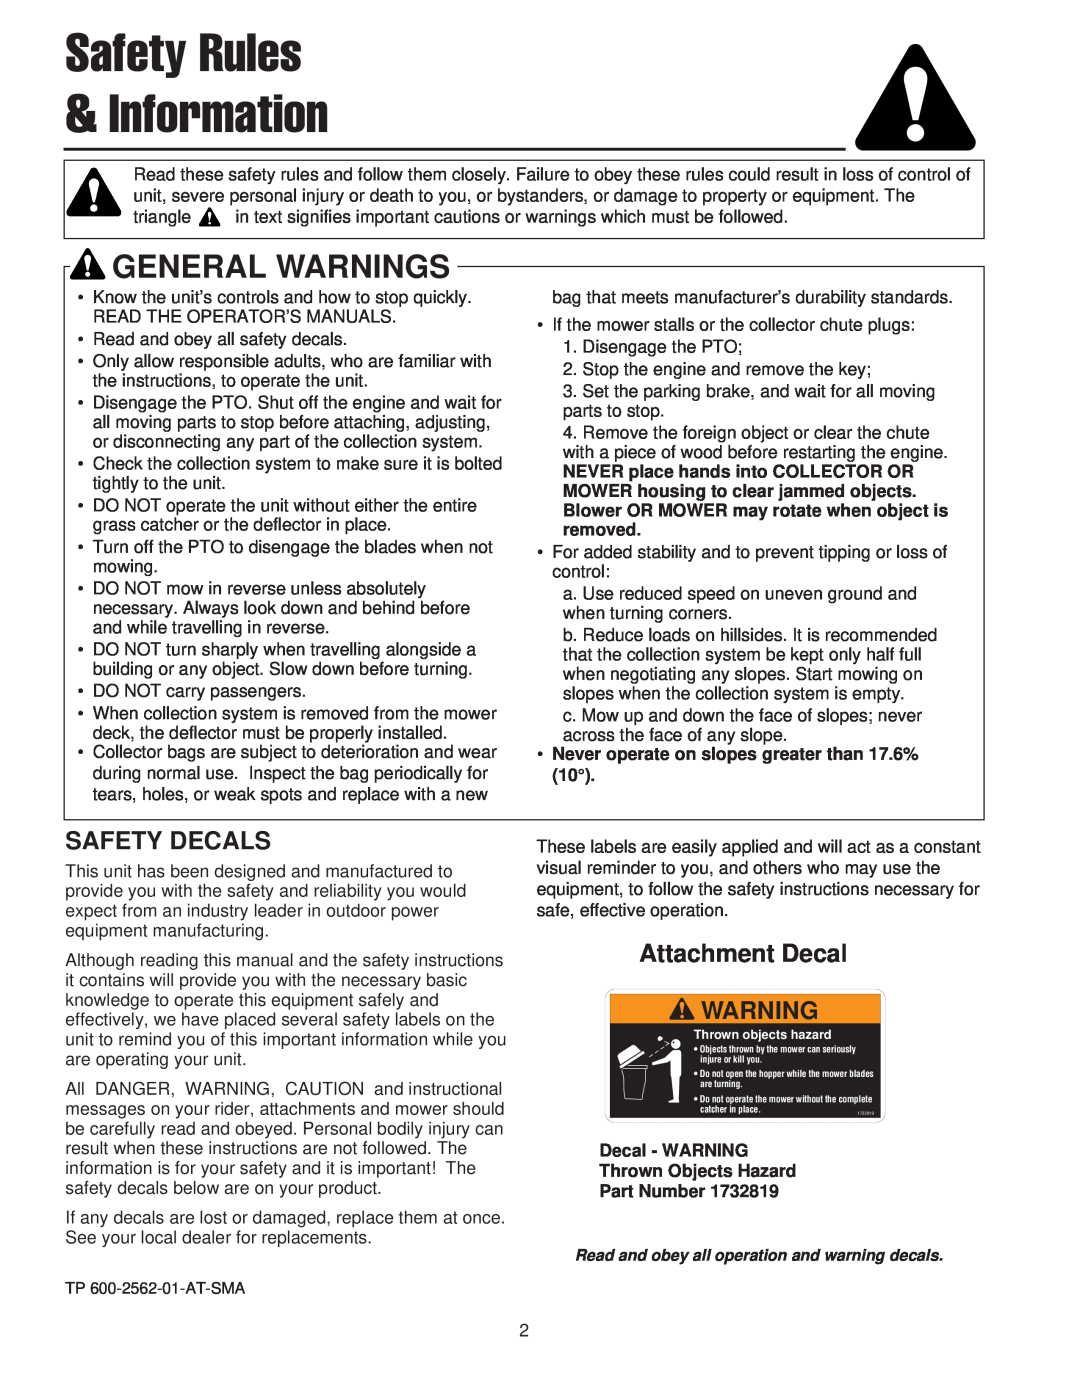 Snapper 1733729, 1695168 manual Safety Rules Information, Safety Decals, Attachment Decal, General Warnings 